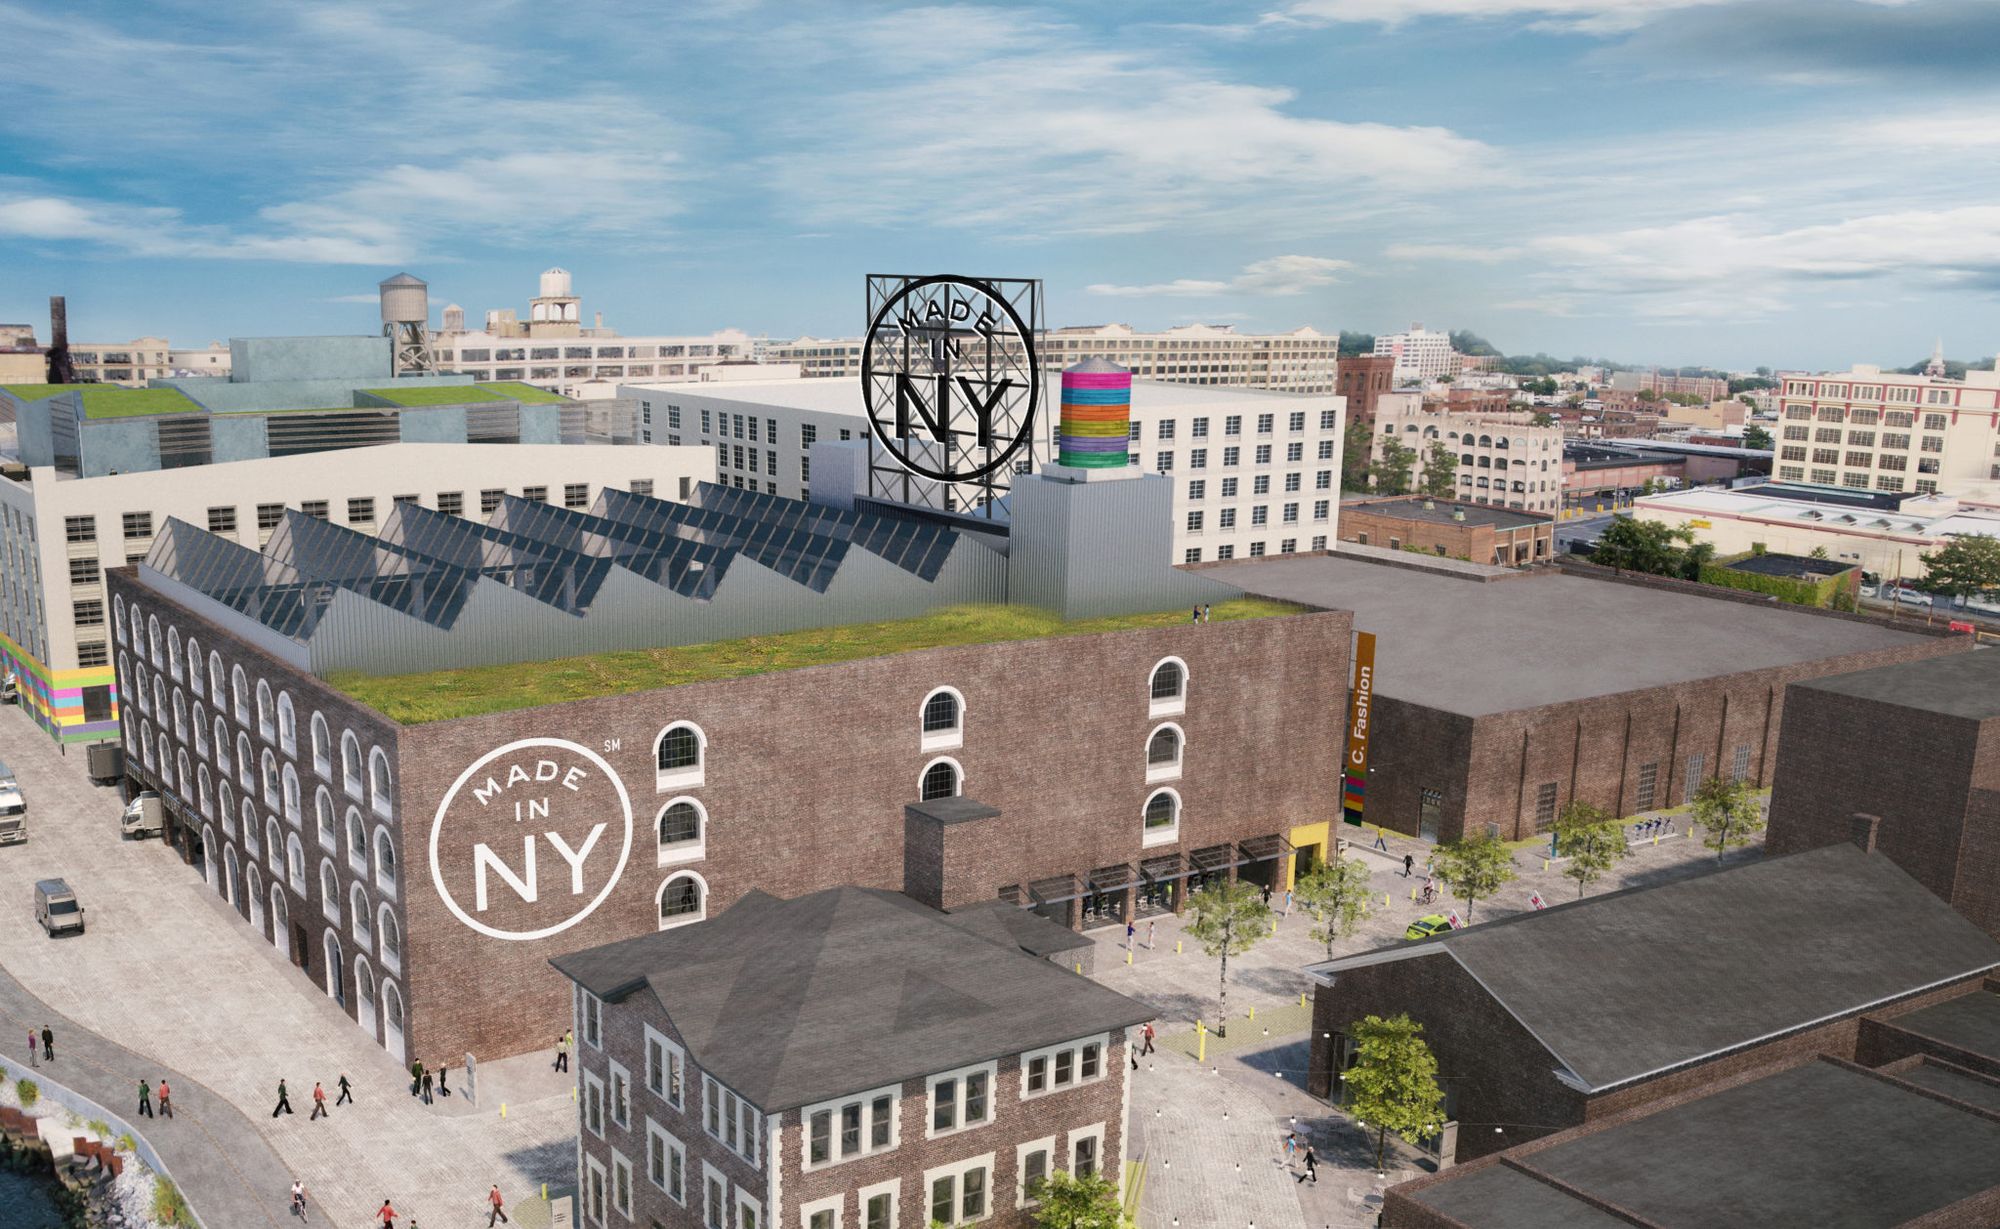 Gentrification Concerns Raised Over Proposed “Made In New York” Campus